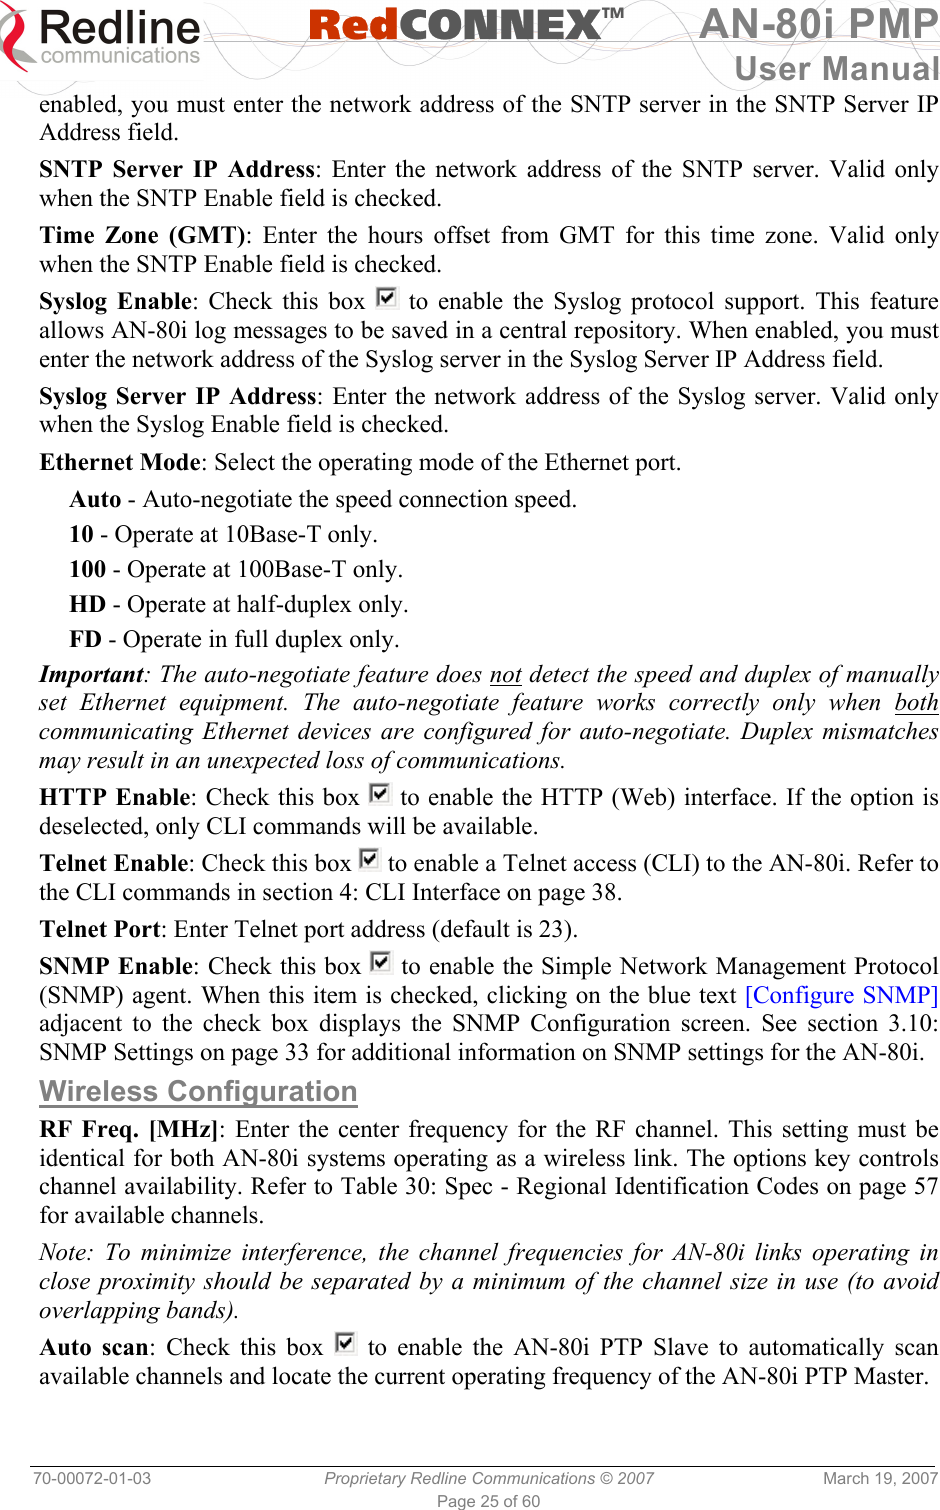   RedCONNEXTM AN-80i PMP User Manual 70-00072-01-03  Proprietary Redline Communications © 2007  March 19, 2007 Page 25 of 60 enabled, you must enter the network address of the SNTP server in the SNTP Server IP Address field.  SNTP Server IP Address: Enter the network address of the SNTP server. Valid only when the SNTP Enable field is checked. Time Zone (GMT): Enter the hours offset from GMT for this time zone. Valid only when the SNTP Enable field is checked. Syslog Enable: Check this box   to enable the Syslog protocol support. This feature allows AN-80i log messages to be saved in a central repository. When enabled, you must enter the network address of the Syslog server in the Syslog Server IP Address field. Syslog Server IP Address: Enter the network address of the Syslog server. Valid only when the Syslog Enable field is checked. Ethernet Mode: Select the operating mode of the Ethernet port. Auto - Auto-negotiate the speed connection speed. 10 - Operate at 10Base-T only. 100 - Operate at 100Base-T only. HD - Operate at half-duplex only. FD - Operate in full duplex only. Important: The auto-negotiate feature does not detect the speed and duplex of manually set Ethernet equipment. The auto-negotiate feature works correctly only when both communicating Ethernet devices are configured for auto-negotiate. Duplex mismatches may result in an unexpected loss of communications. HTTP Enable: Check this box   to enable the HTTP (Web) interface. If the option is deselected, only CLI commands will be available. Telnet Enable: Check this box   to enable a Telnet access (CLI) to the AN-80i. Refer to the CLI commands in section 4: CLI Interface on page 38. Telnet Port: Enter Telnet port address (default is 23). SNMP Enable: Check this box   to enable the Simple Network Management Protocol (SNMP) agent. When this item is checked, clicking on the blue text [Configure SNMP] adjacent to the check box displays the SNMP Configuration screen. See section 3.10: SNMP Settings on page 33 for additional information on SNMP settings for the AN-80i. Wireless Configuration RF Freq. [MHz]: Enter the center frequency for the RF channel. This setting must be identical for both AN-80i systems operating as a wireless link. The options key controls channel availability. Refer to Table 30: Spec - Regional Identification Codes on page 57 for available channels. Note: To minimize interference, the channel frequencies for AN-80i links operating in close proximity should be separated by a minimum of the channel size in use (to avoid overlapping bands).  Auto scan: Check this box   to enable the AN-80i PTP Slave to automatically scan available channels and locate the current operating frequency of the AN-80i PTP Master. 